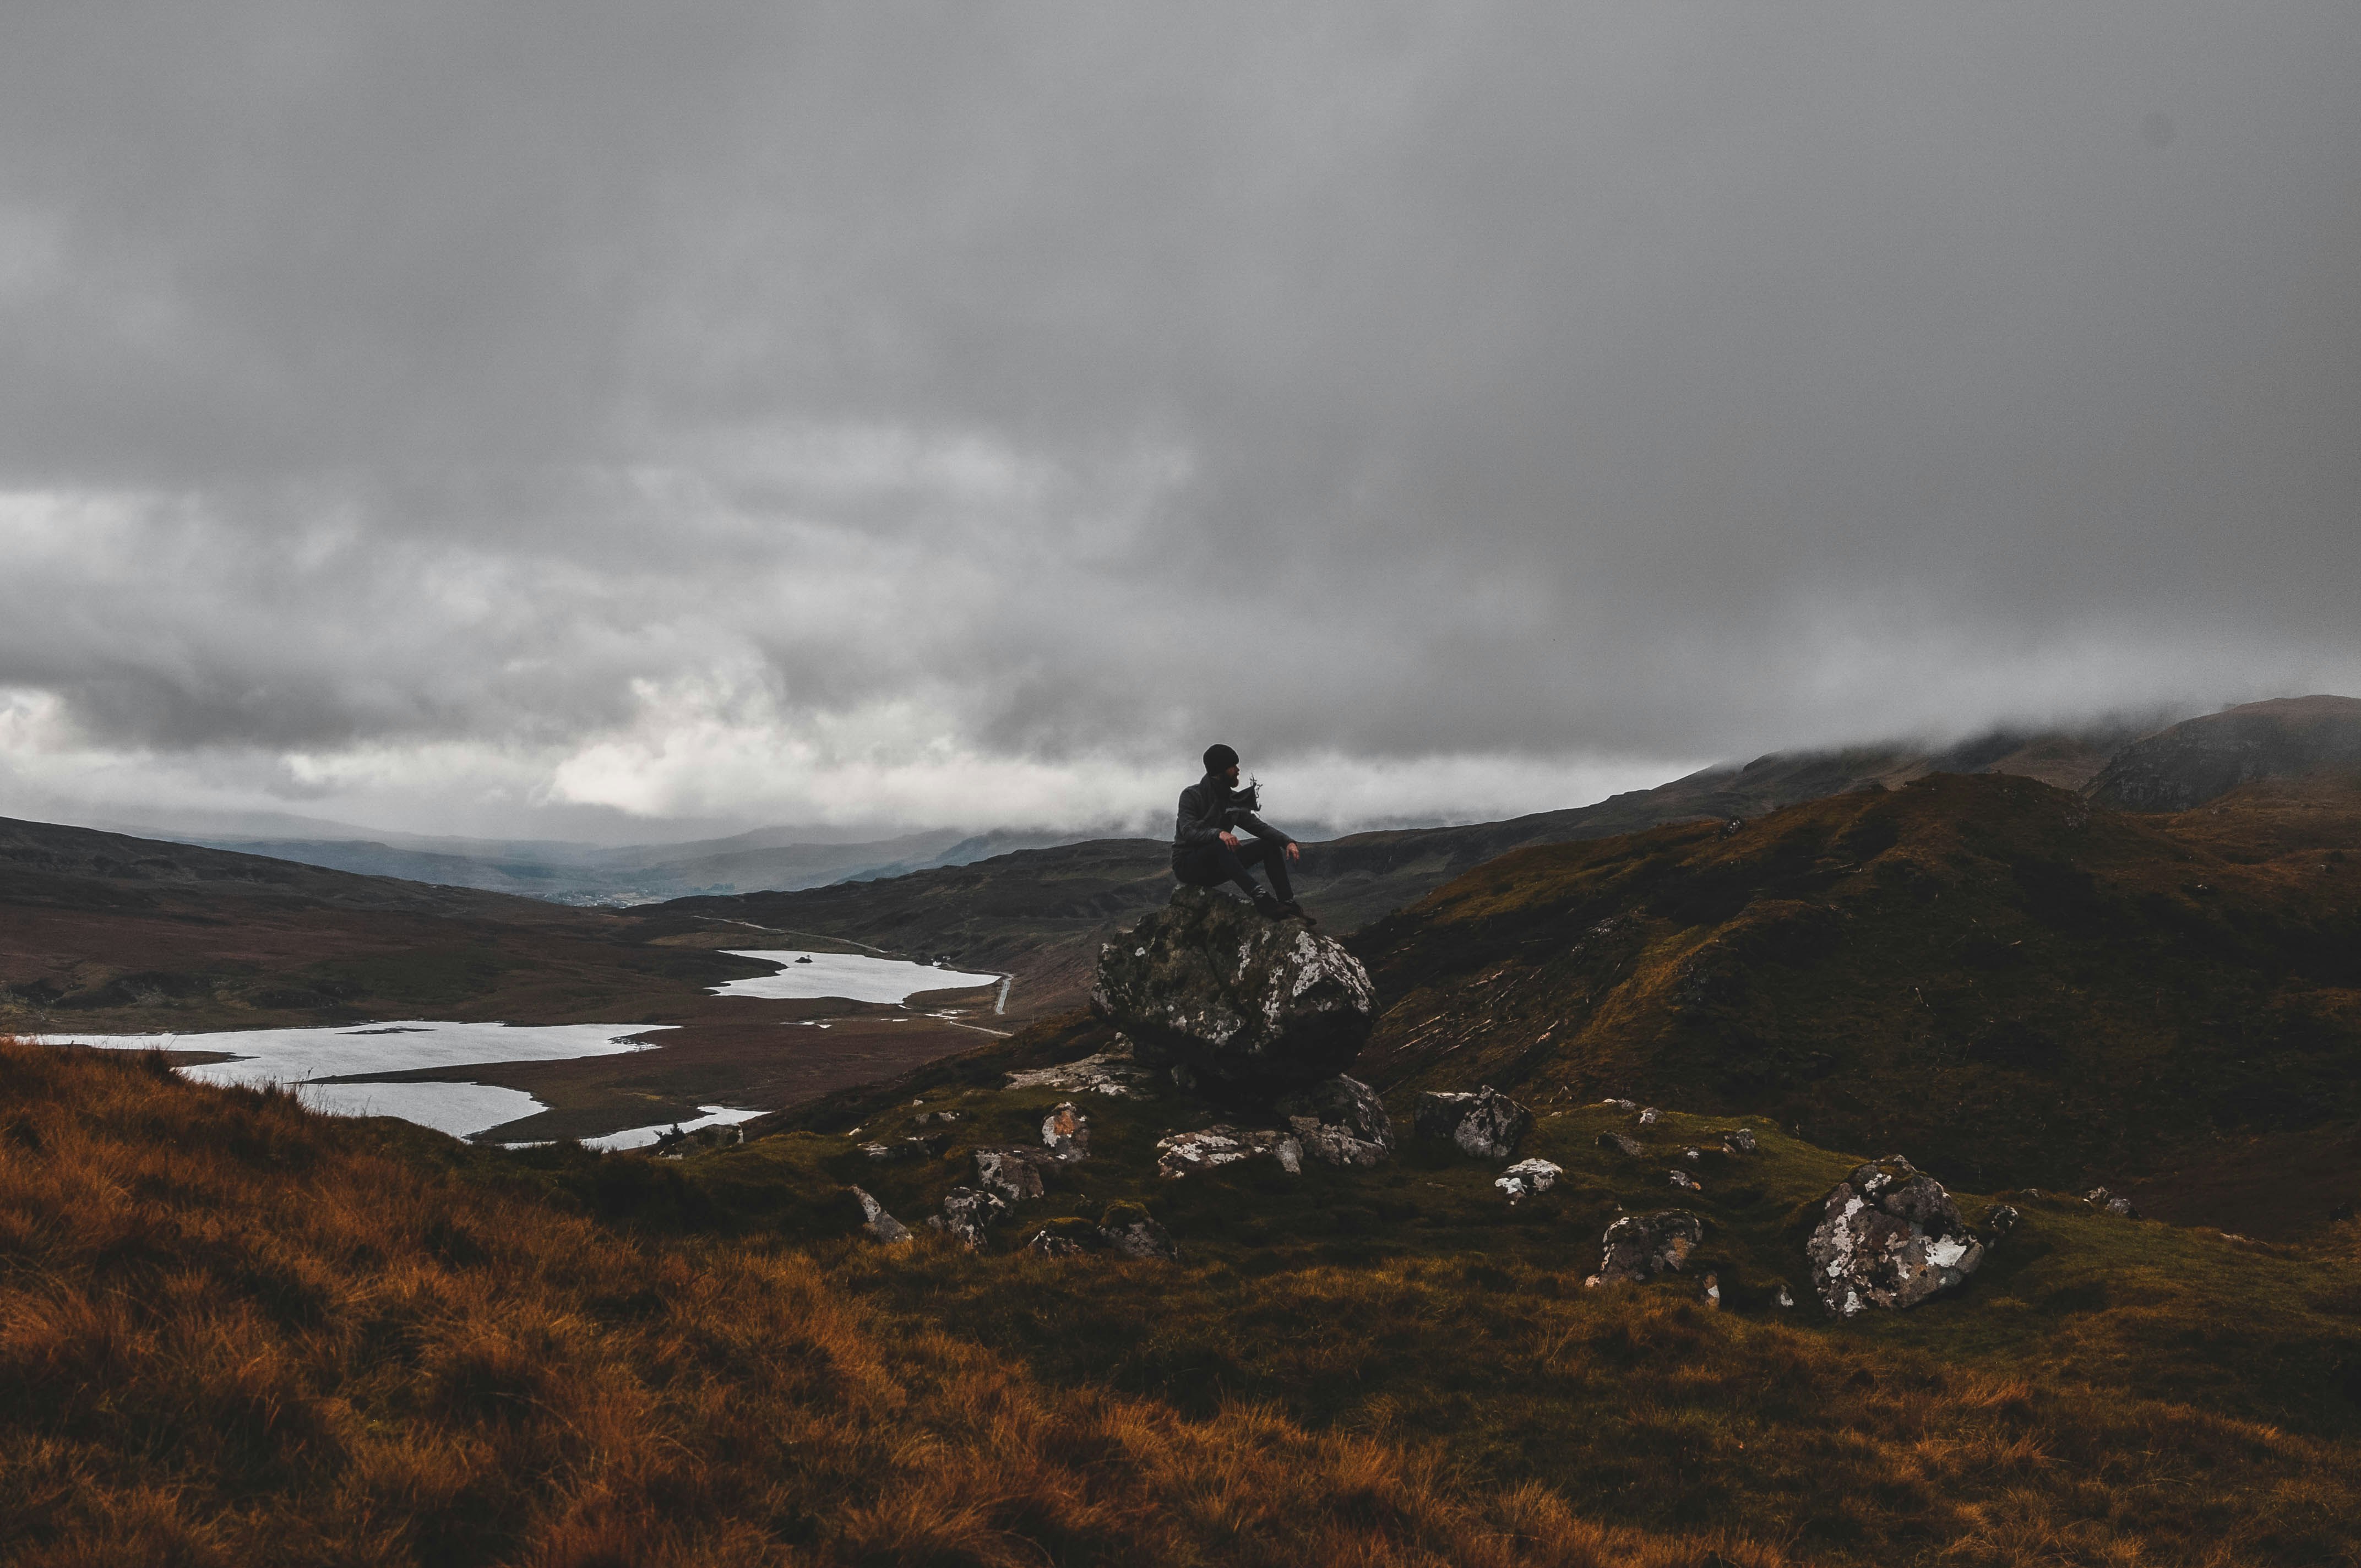 A man sits on a rock in a deserted Highland landscape. In the background is a loch and mountains covered by fog.